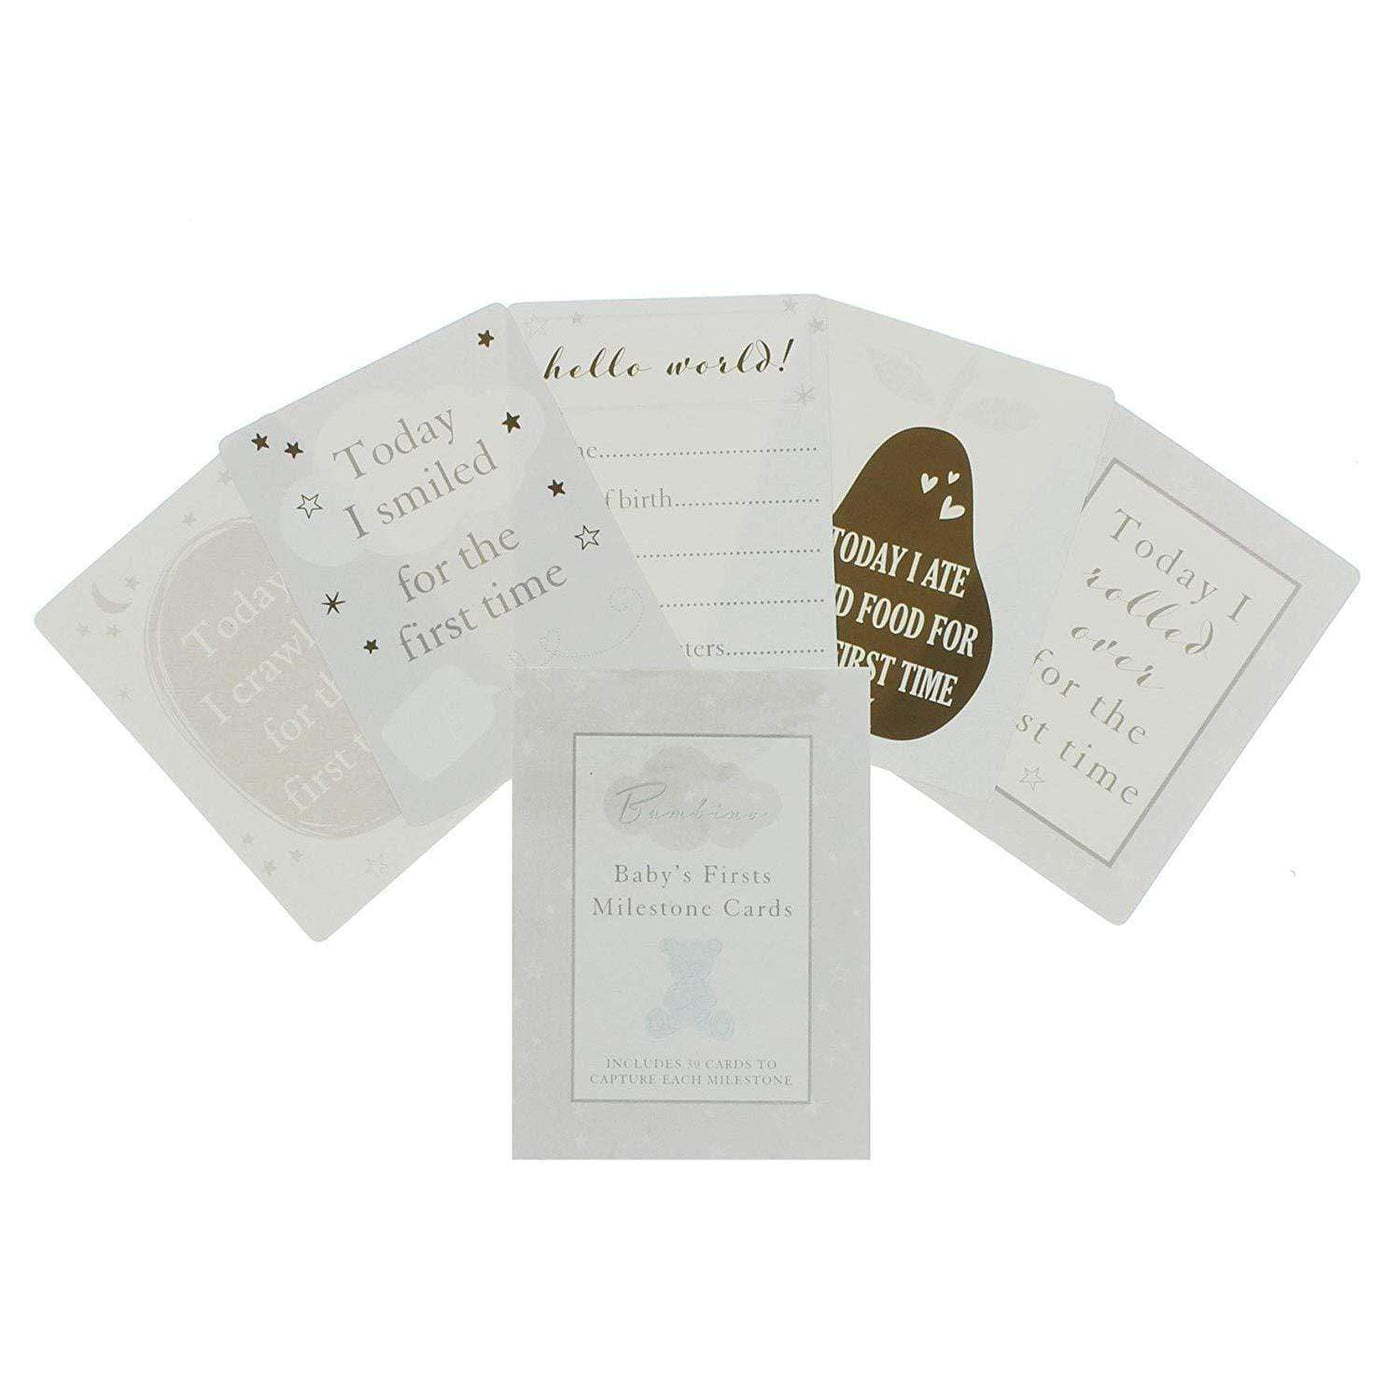 Widdop Gifts Childrens Stationery Bambino Little Star Social Media Milestone Cards for Baby's Firsts